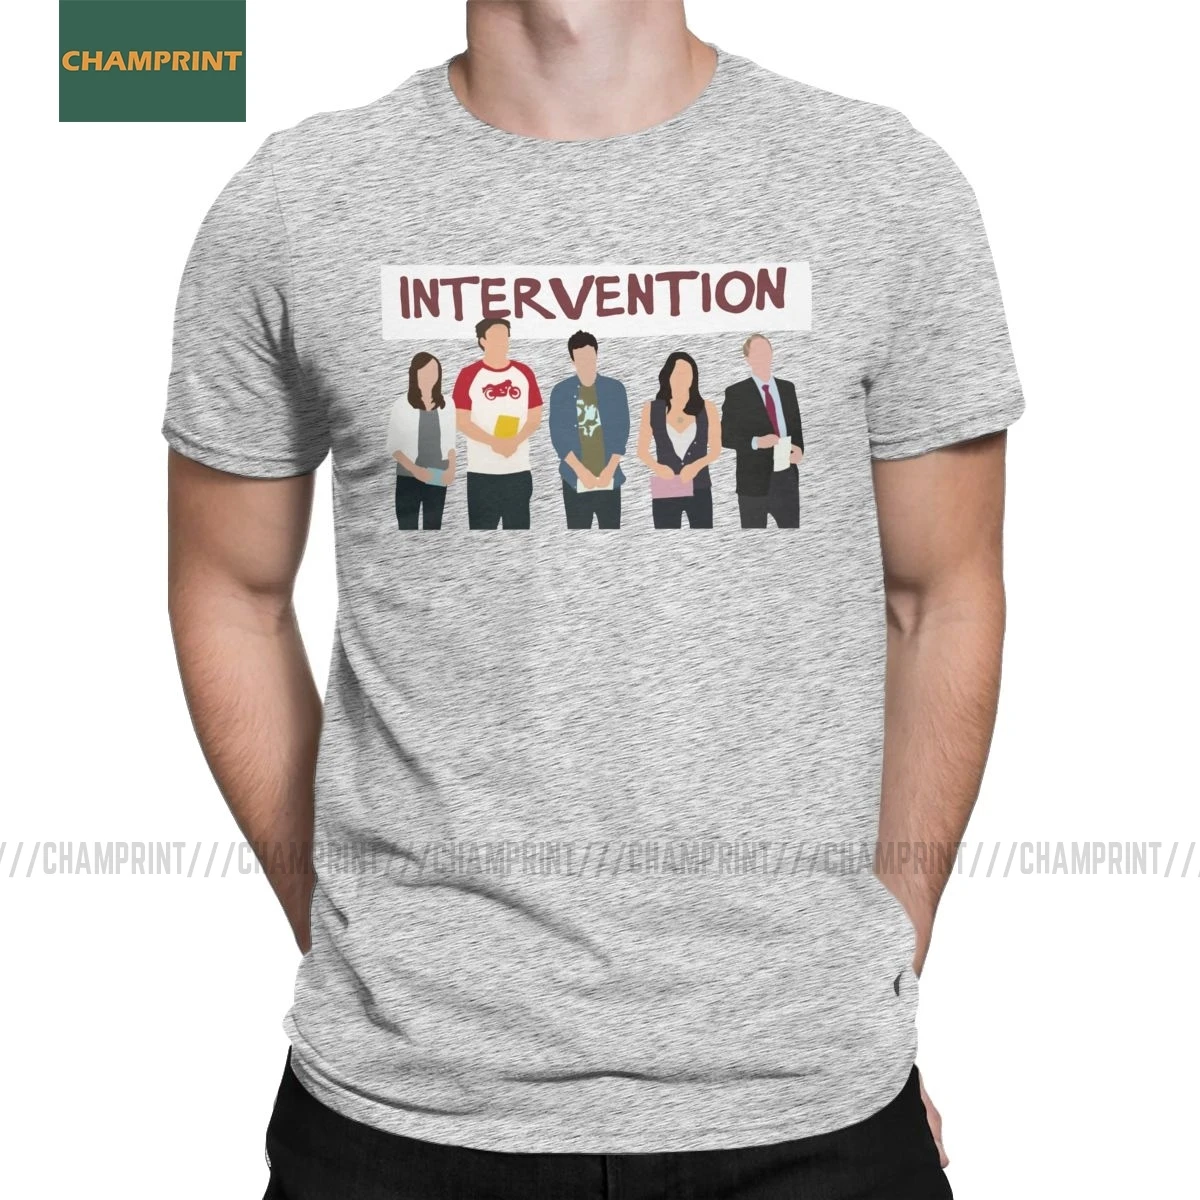 Men's T-Shirts Intervention How I Met Your Mother Cotton Tee Shirt Short Sleeve Tv Show Teddy Legendary T Shirt Plus Size